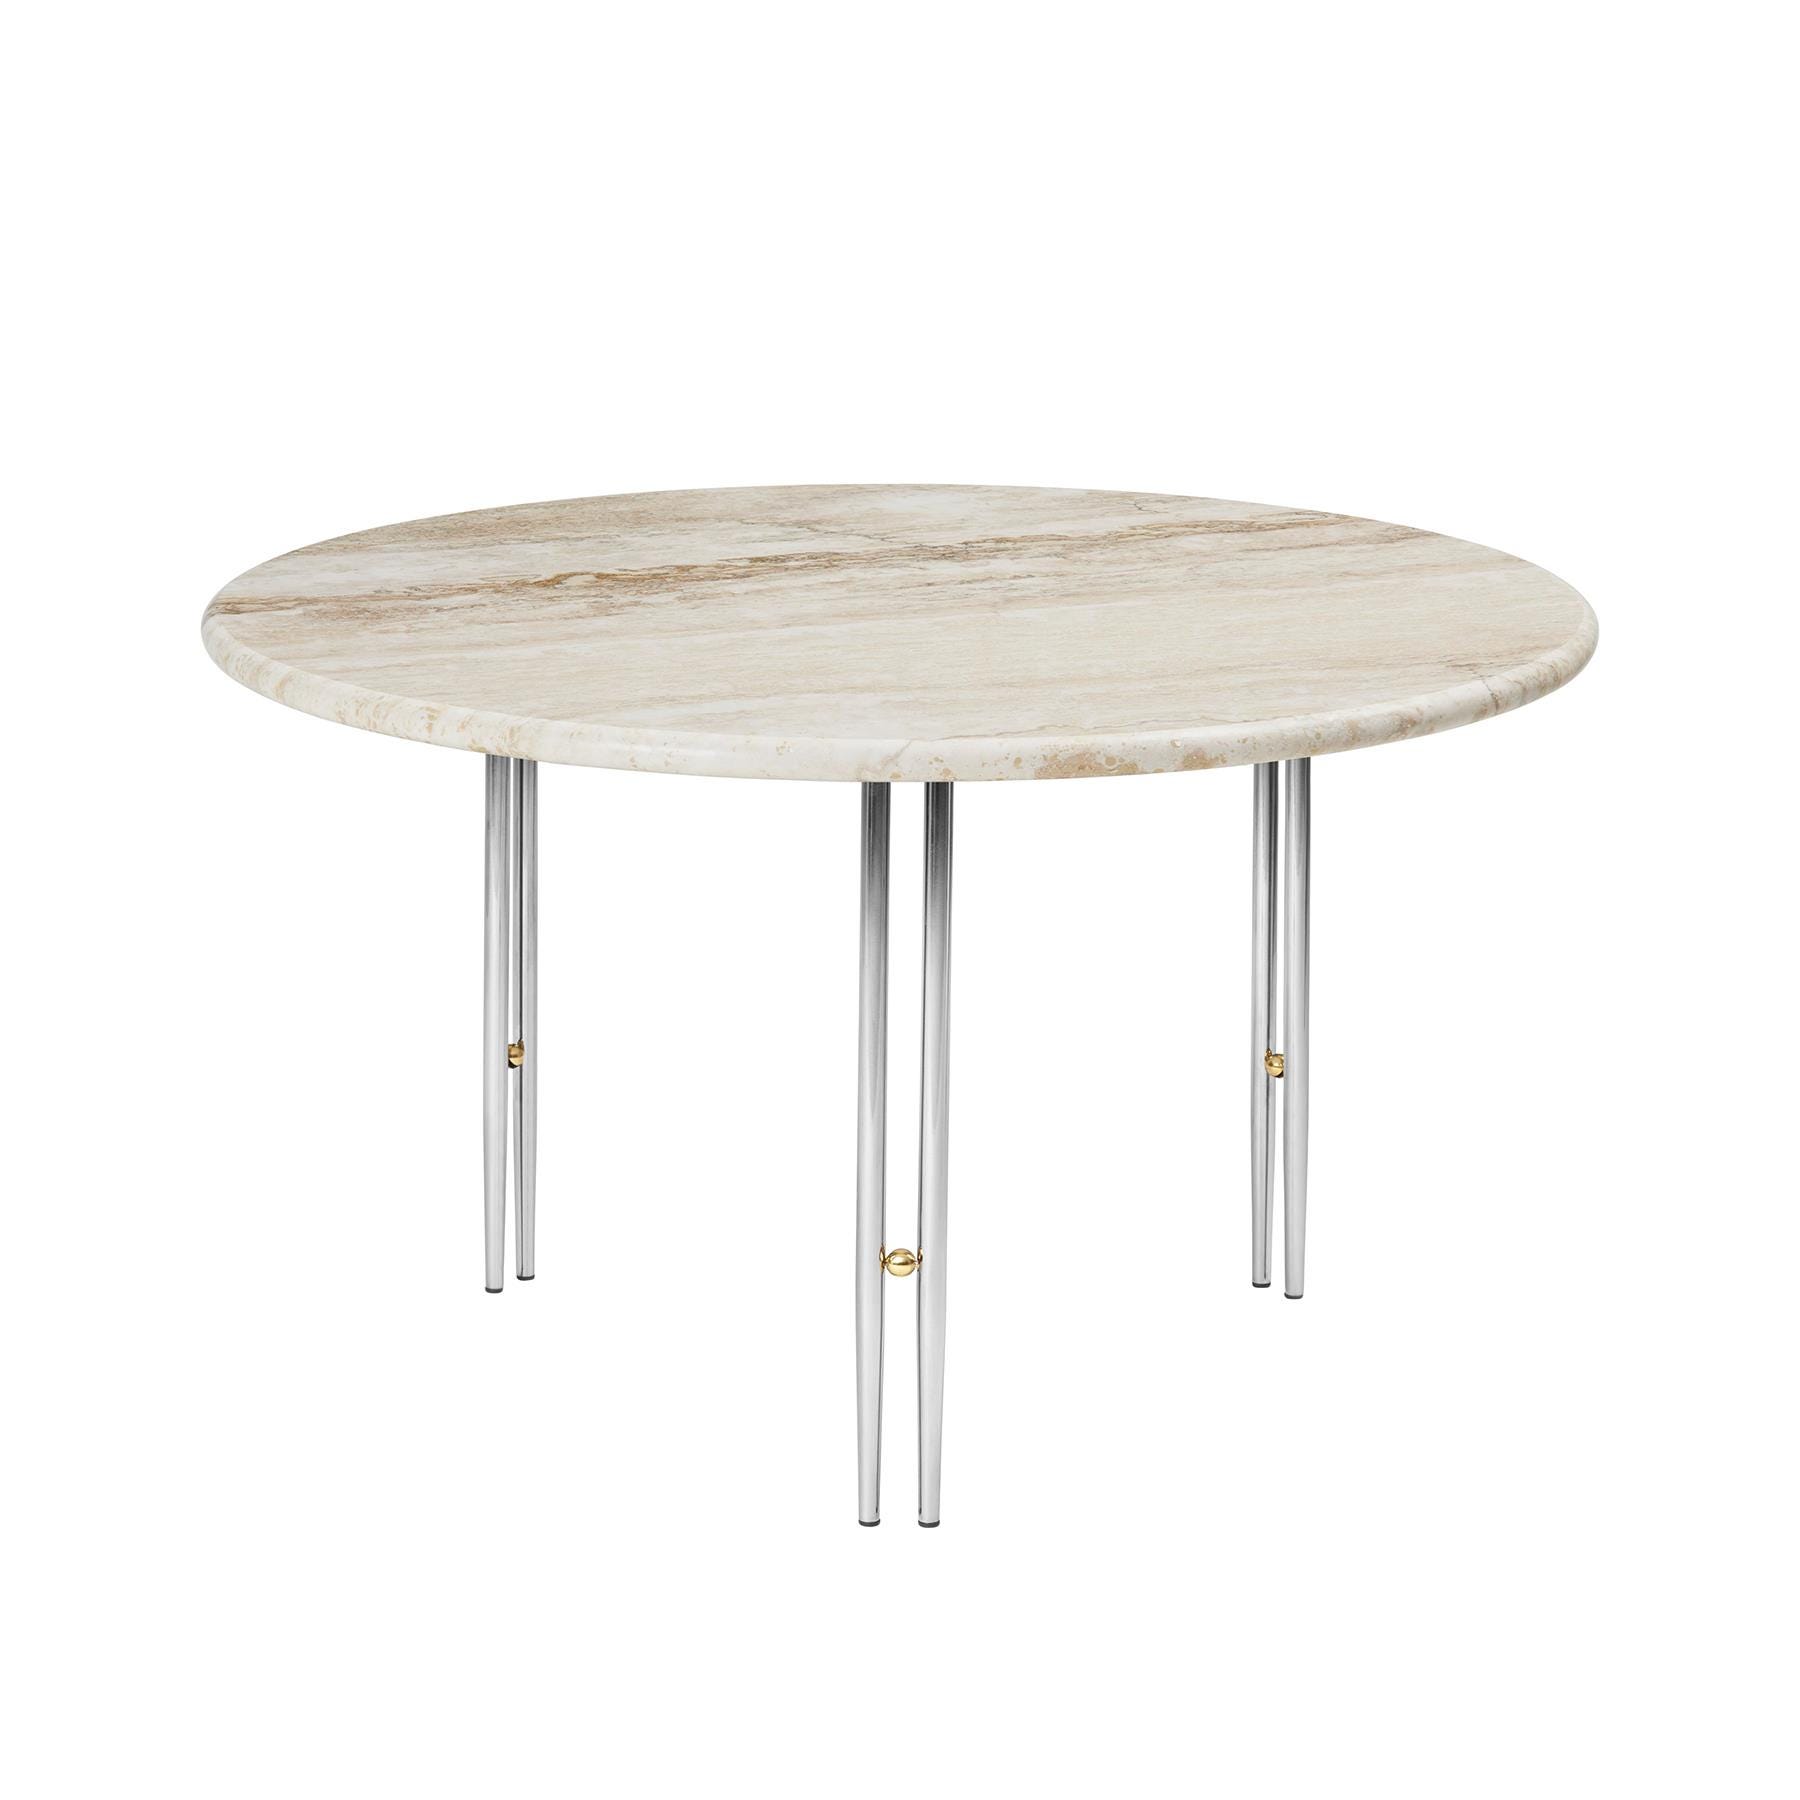 Gubi Ioi Coffee Table 70cm Chrome Base Rippled Beige Grey Designer Furniture From Holloways Of Ludlow